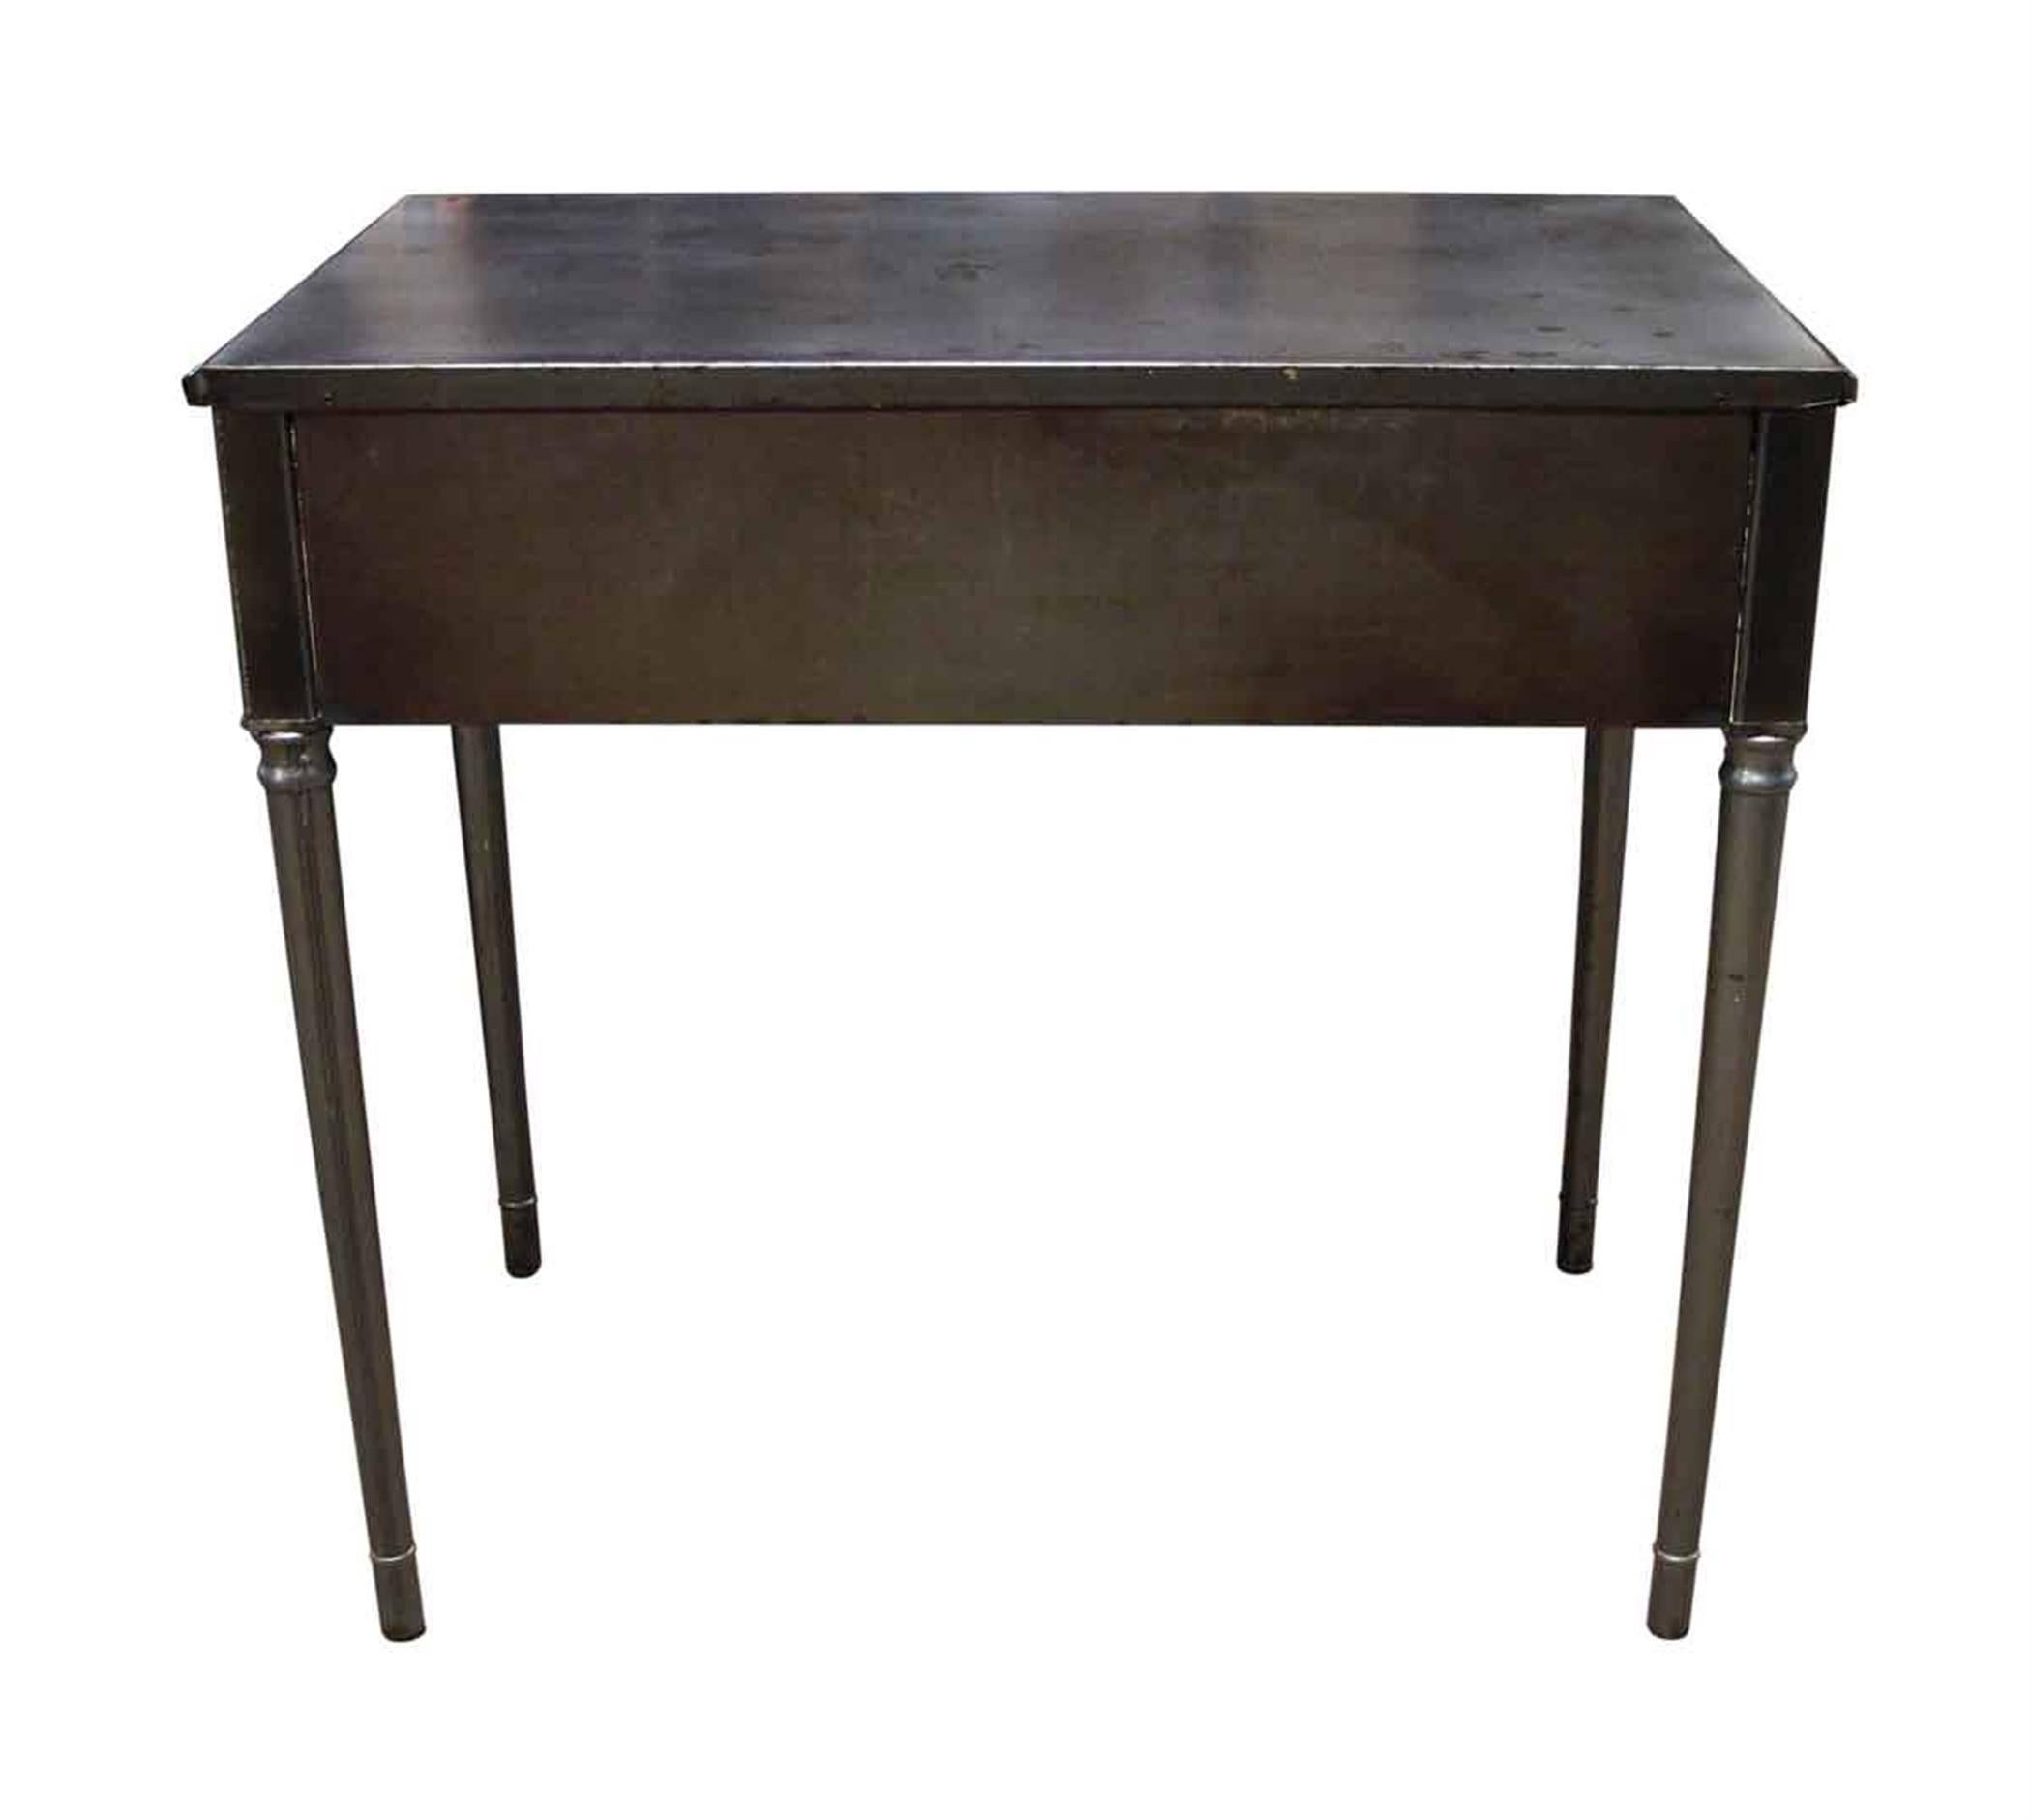 1930s Refinished Steel Industrial Desk with One Drawer 2